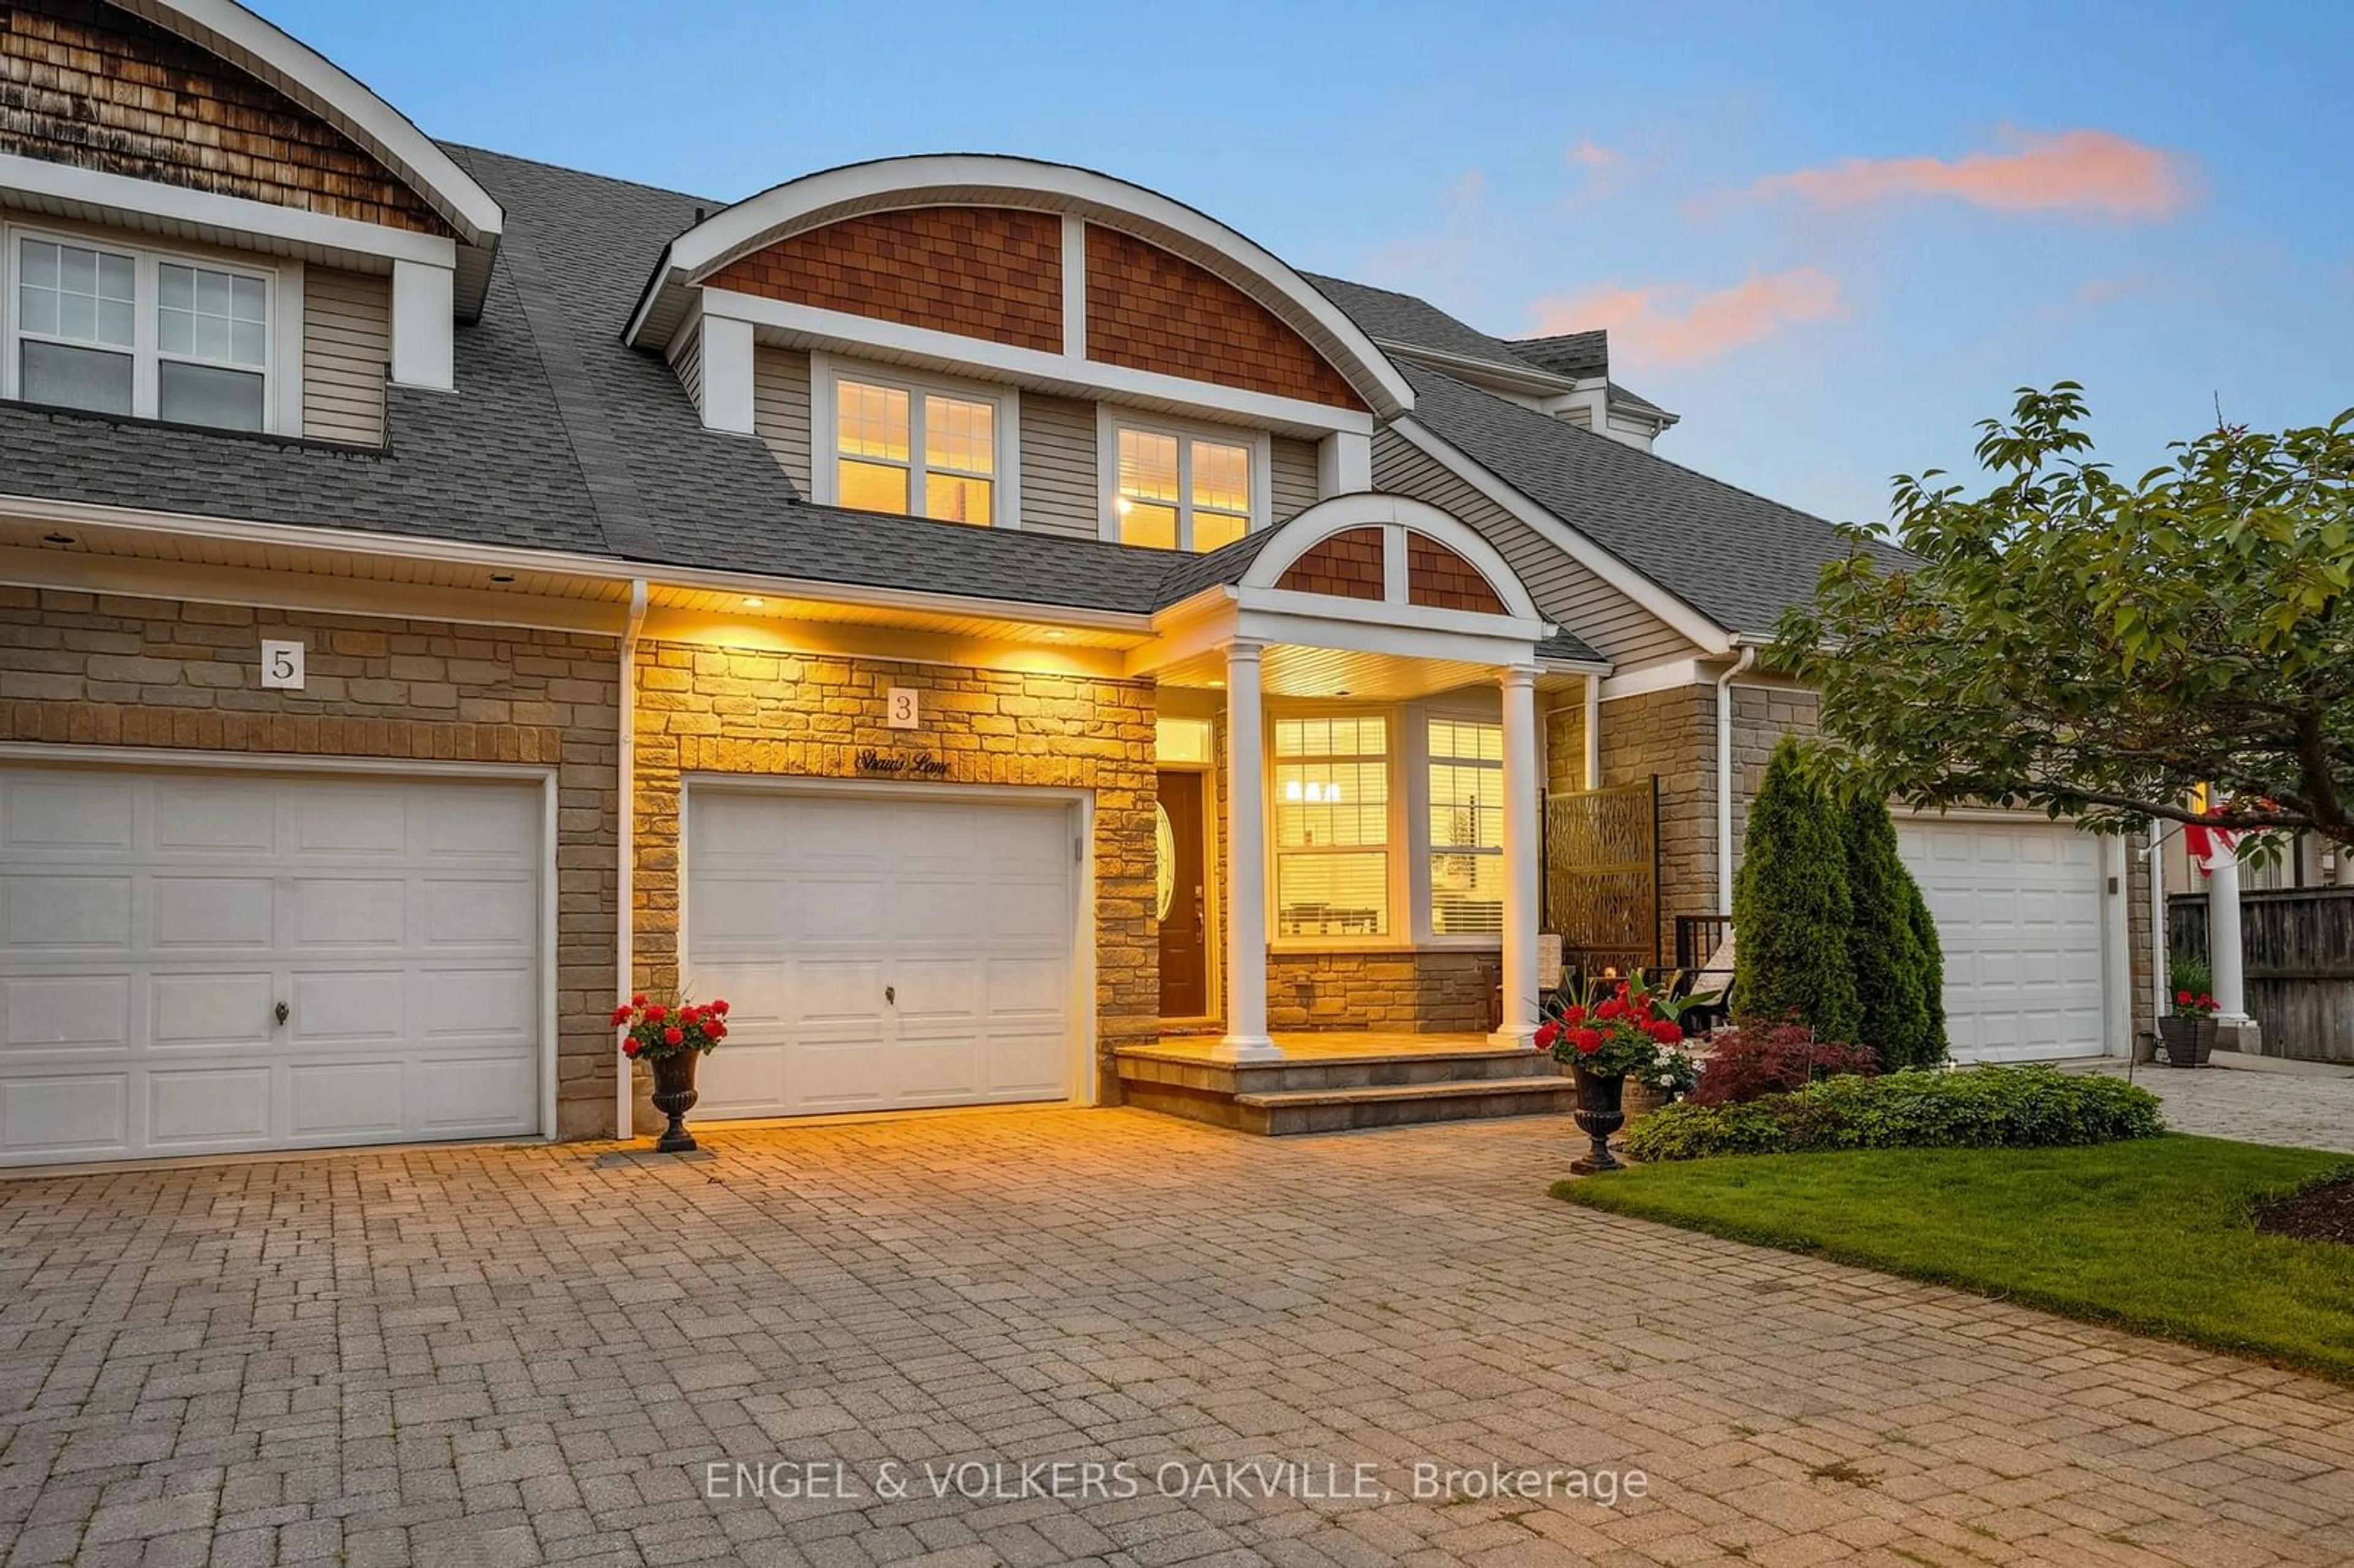 Home with brick exterior material for 3 Shaw's Lane, Niagara-on-the-Lake Ontario L0S 1J0